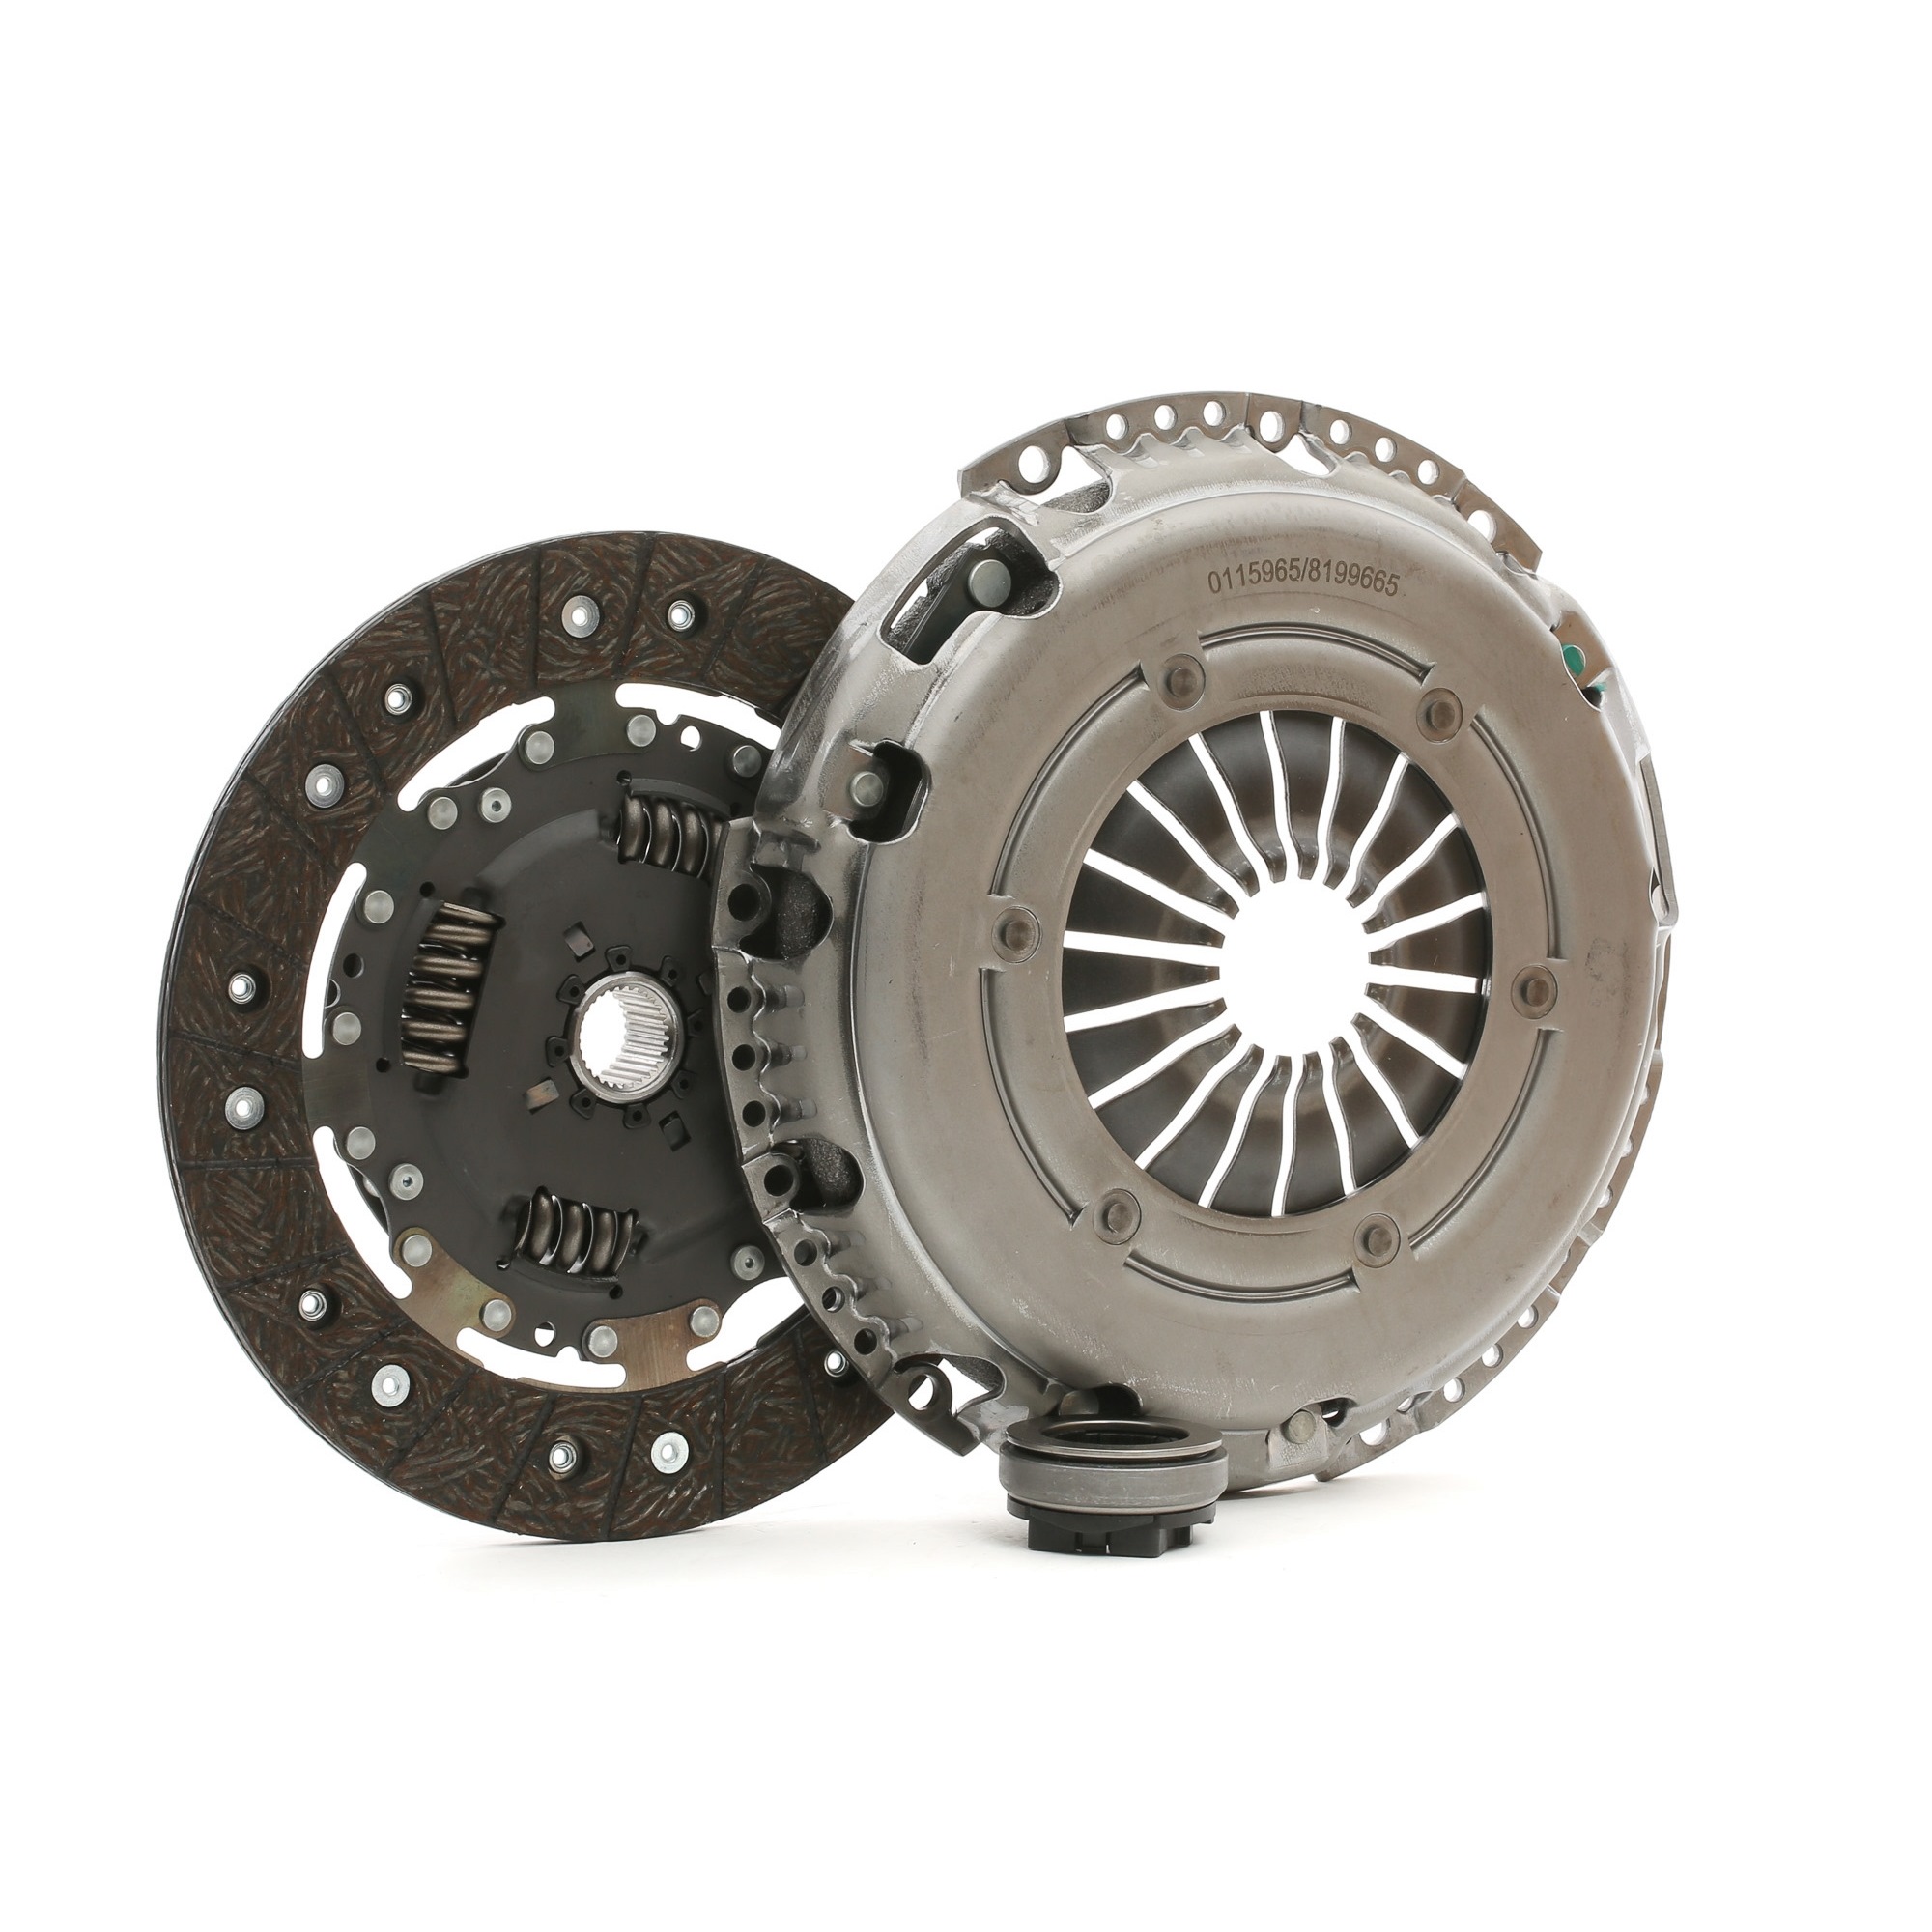 STARK with clutch pressure plate, with clutch disc, with clutch release bearing, 221, 220mm Ø: 221, 220mm Clutch replacement kit SKCK-0100235 buy